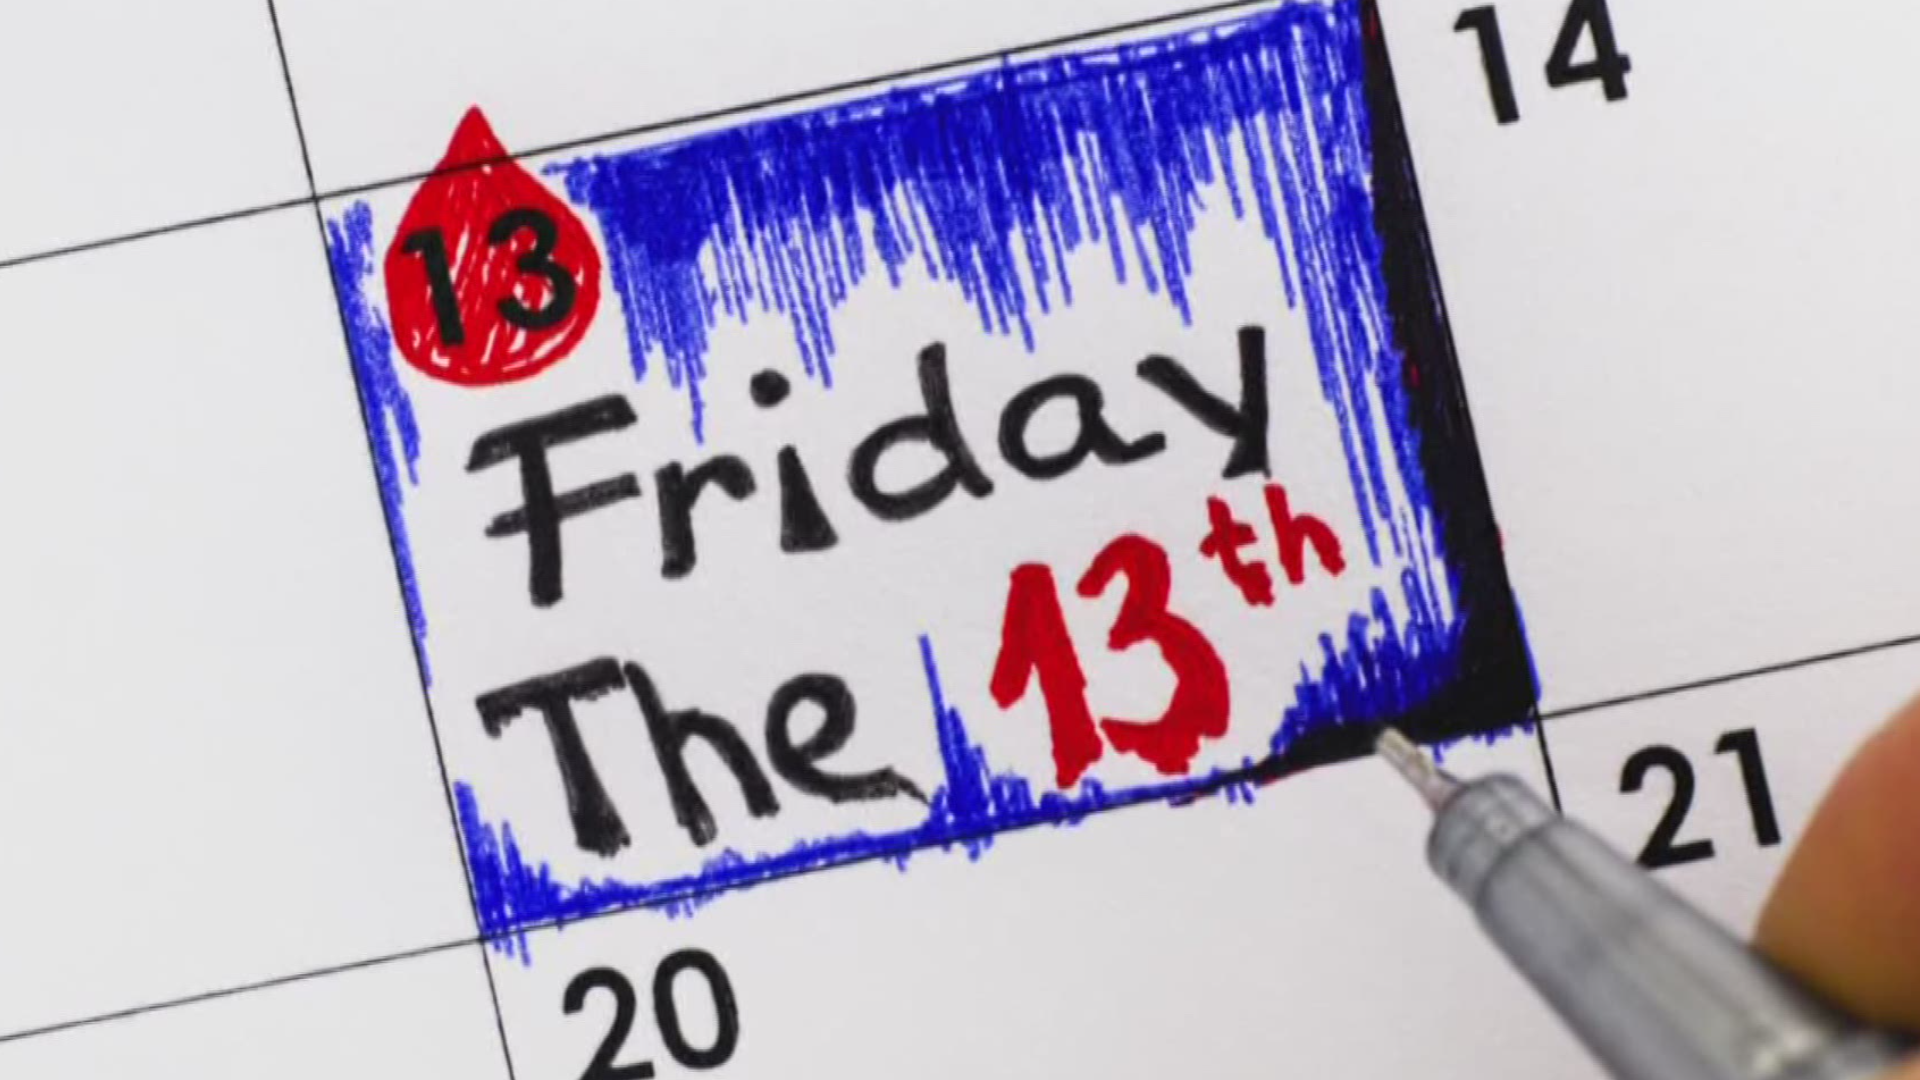 Jabari Thomas goes Beyond the Headline with more on Friday the 13th.